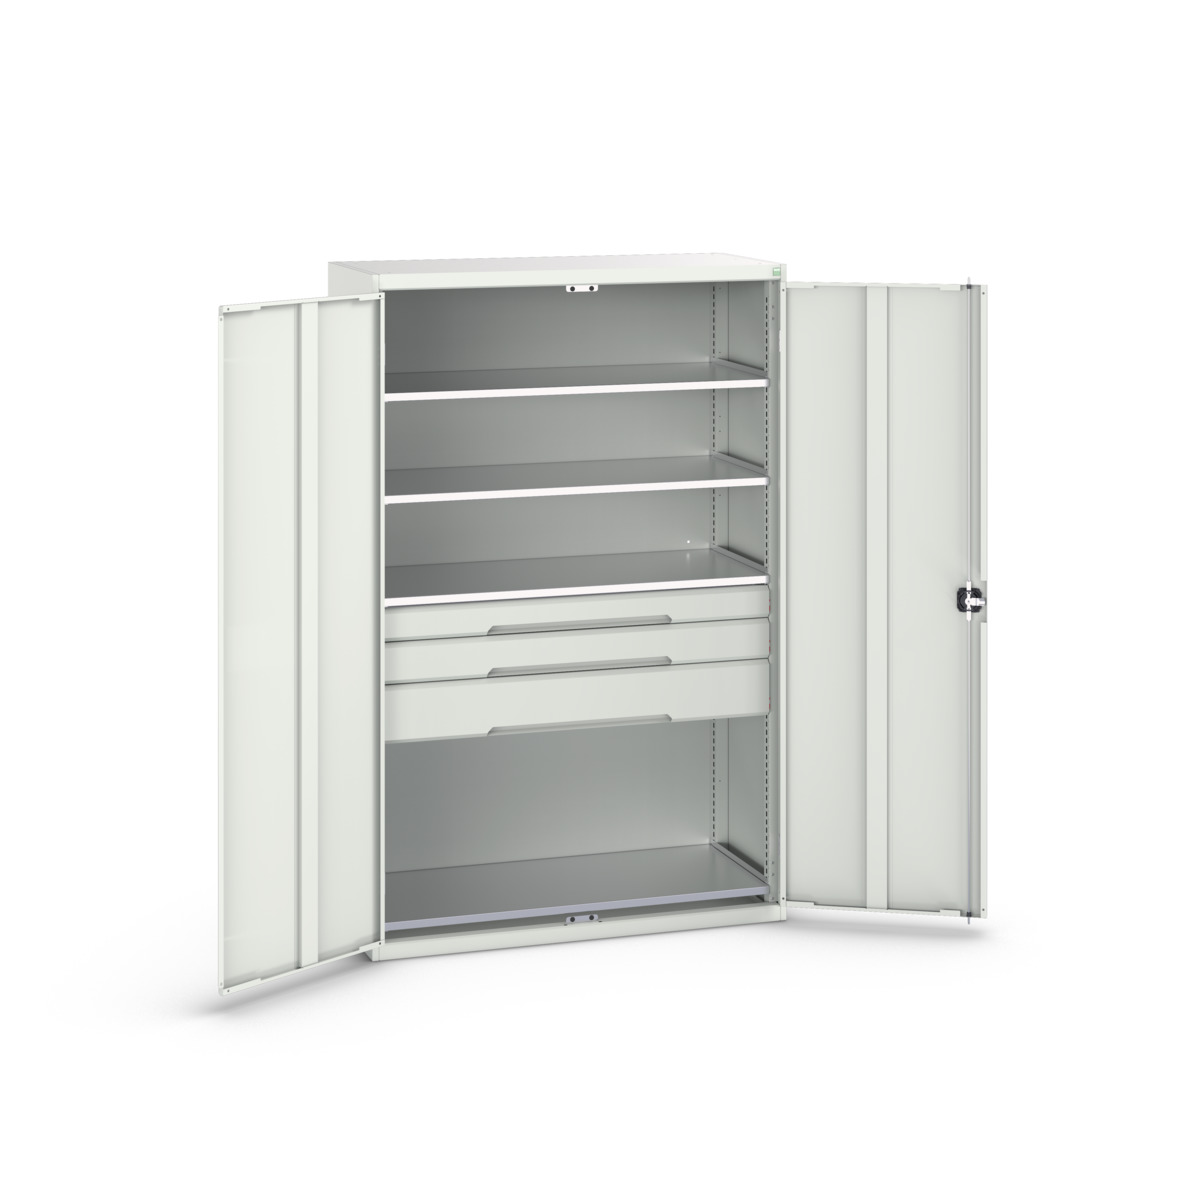 16926655.16 - verso kitted cupboard